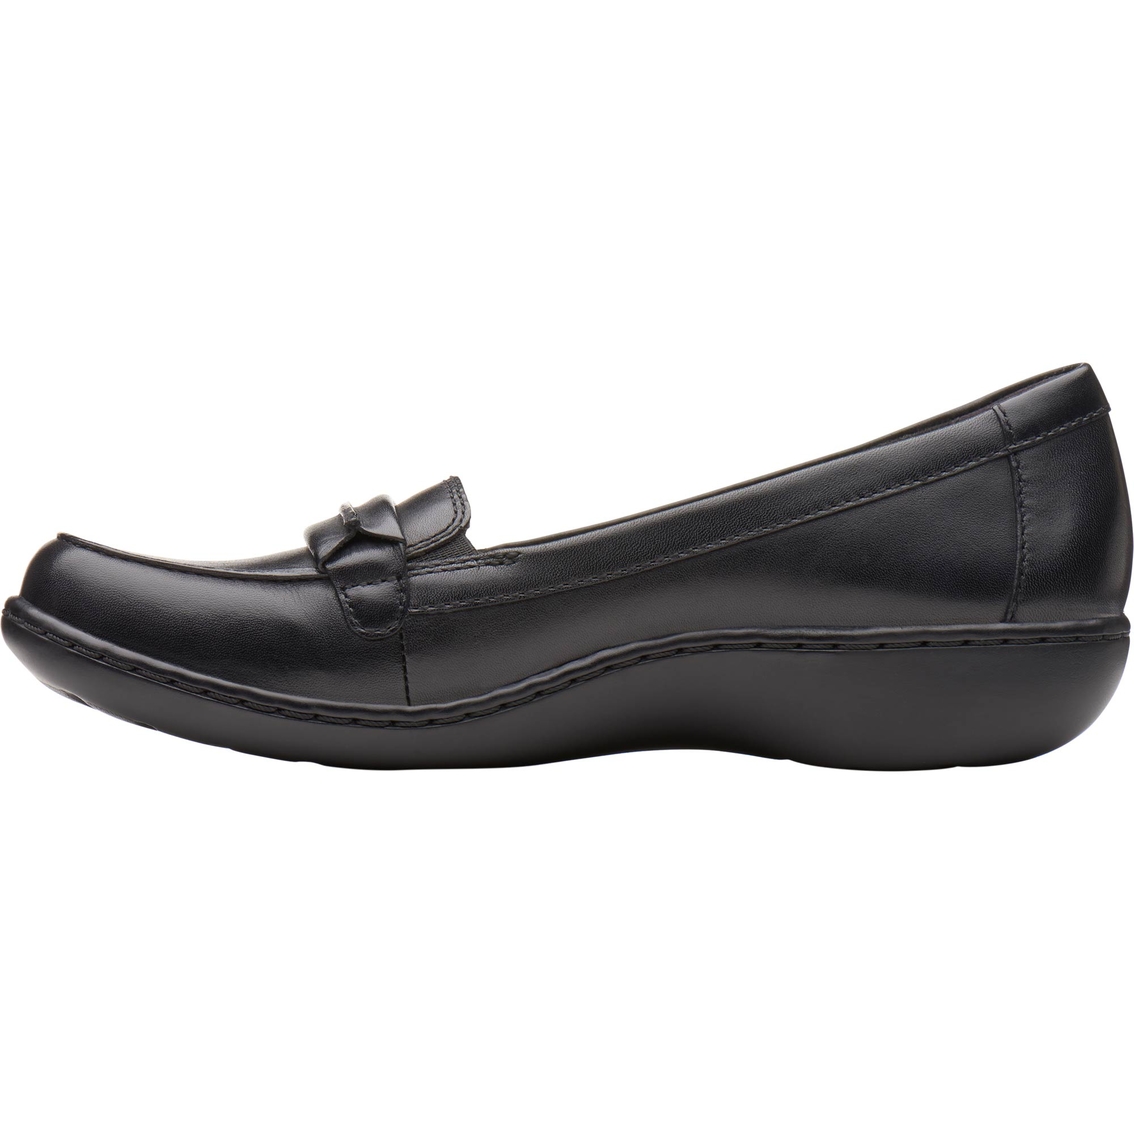 Clarks Ashland Lily Loafers - Image 3 of 6